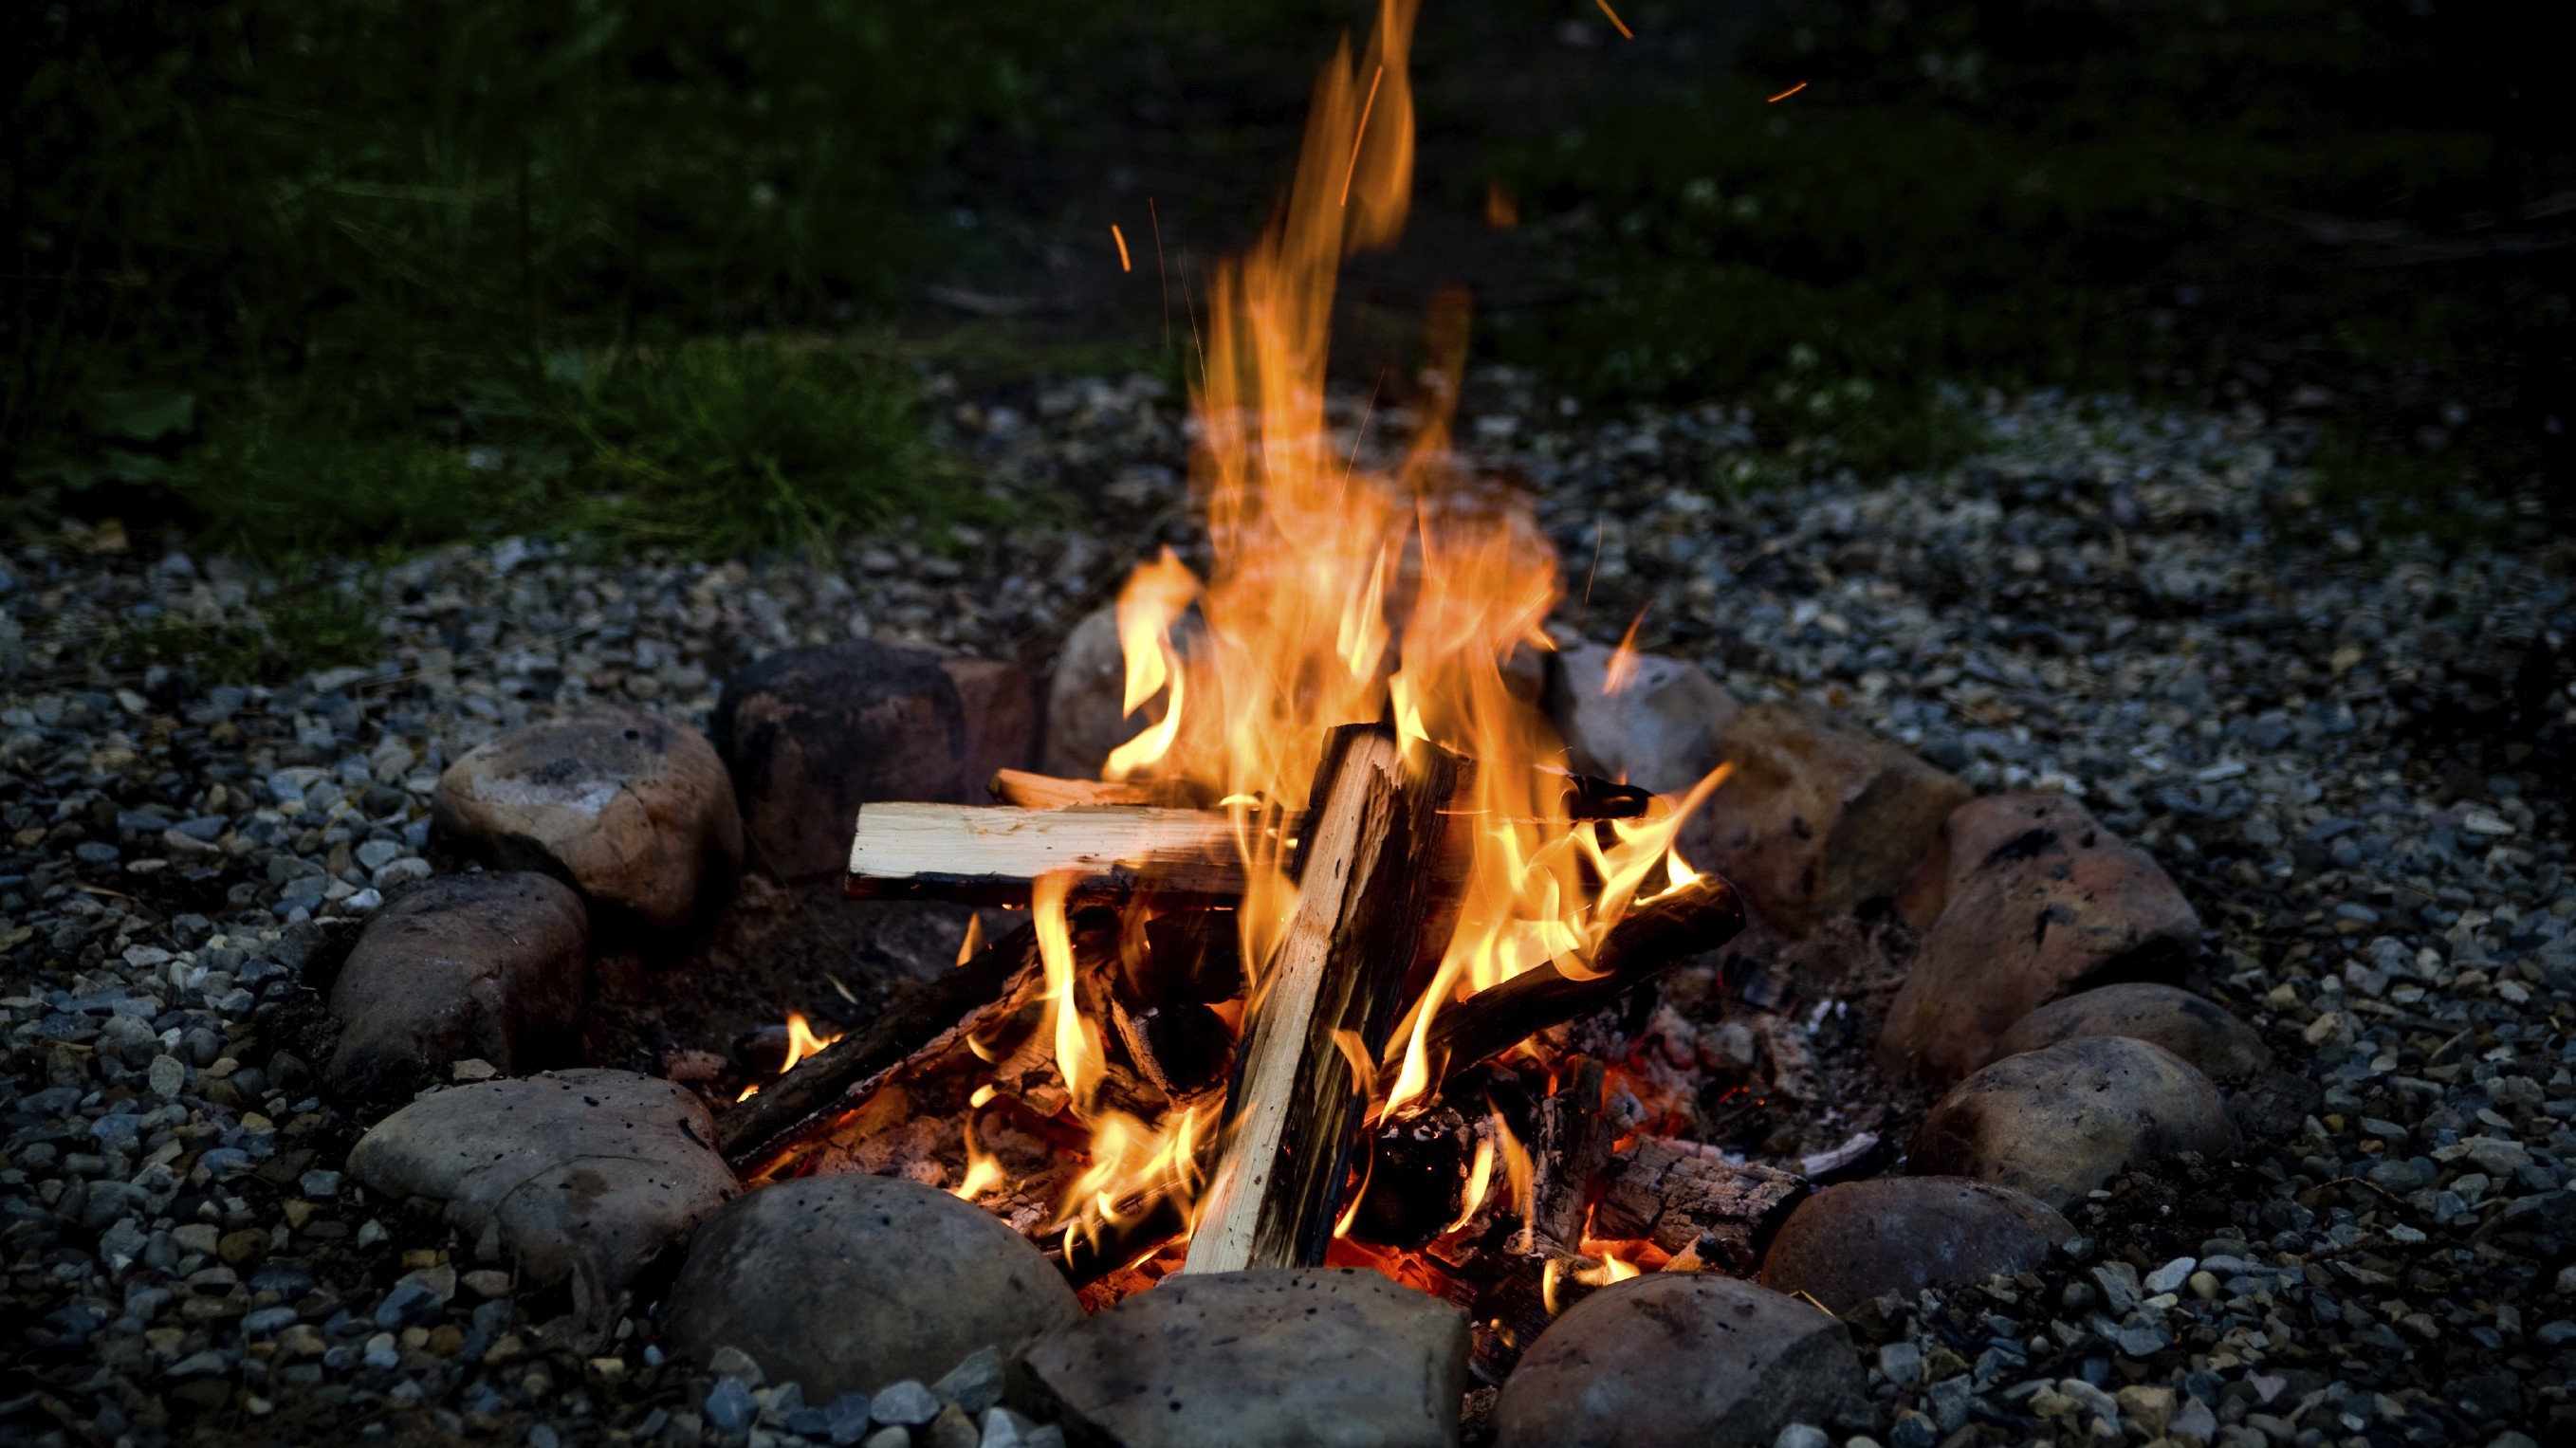 Campfire ban being considered for BC's coast - NEWS 1130